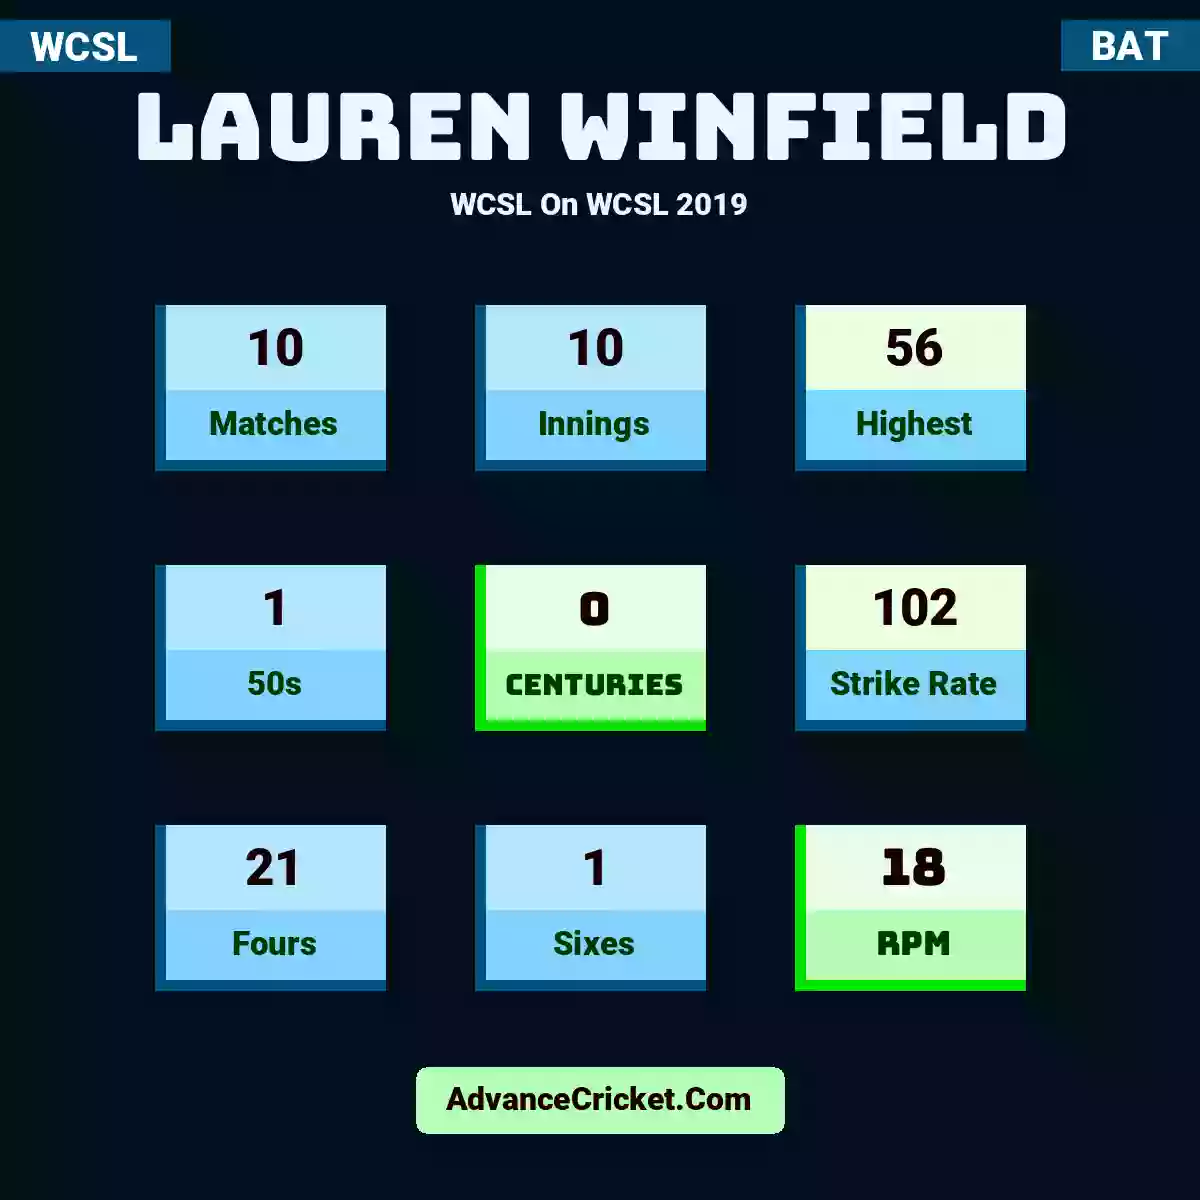 Lauren Winfield WCSL  On WCSL 2019, Lauren Winfield played 10 matches, scored 56 runs as highest, 1 half-centuries, and 0 centuries, with a strike rate of 102. L.Winfield hit 21 fours and 1 sixes, with an RPM of 18.